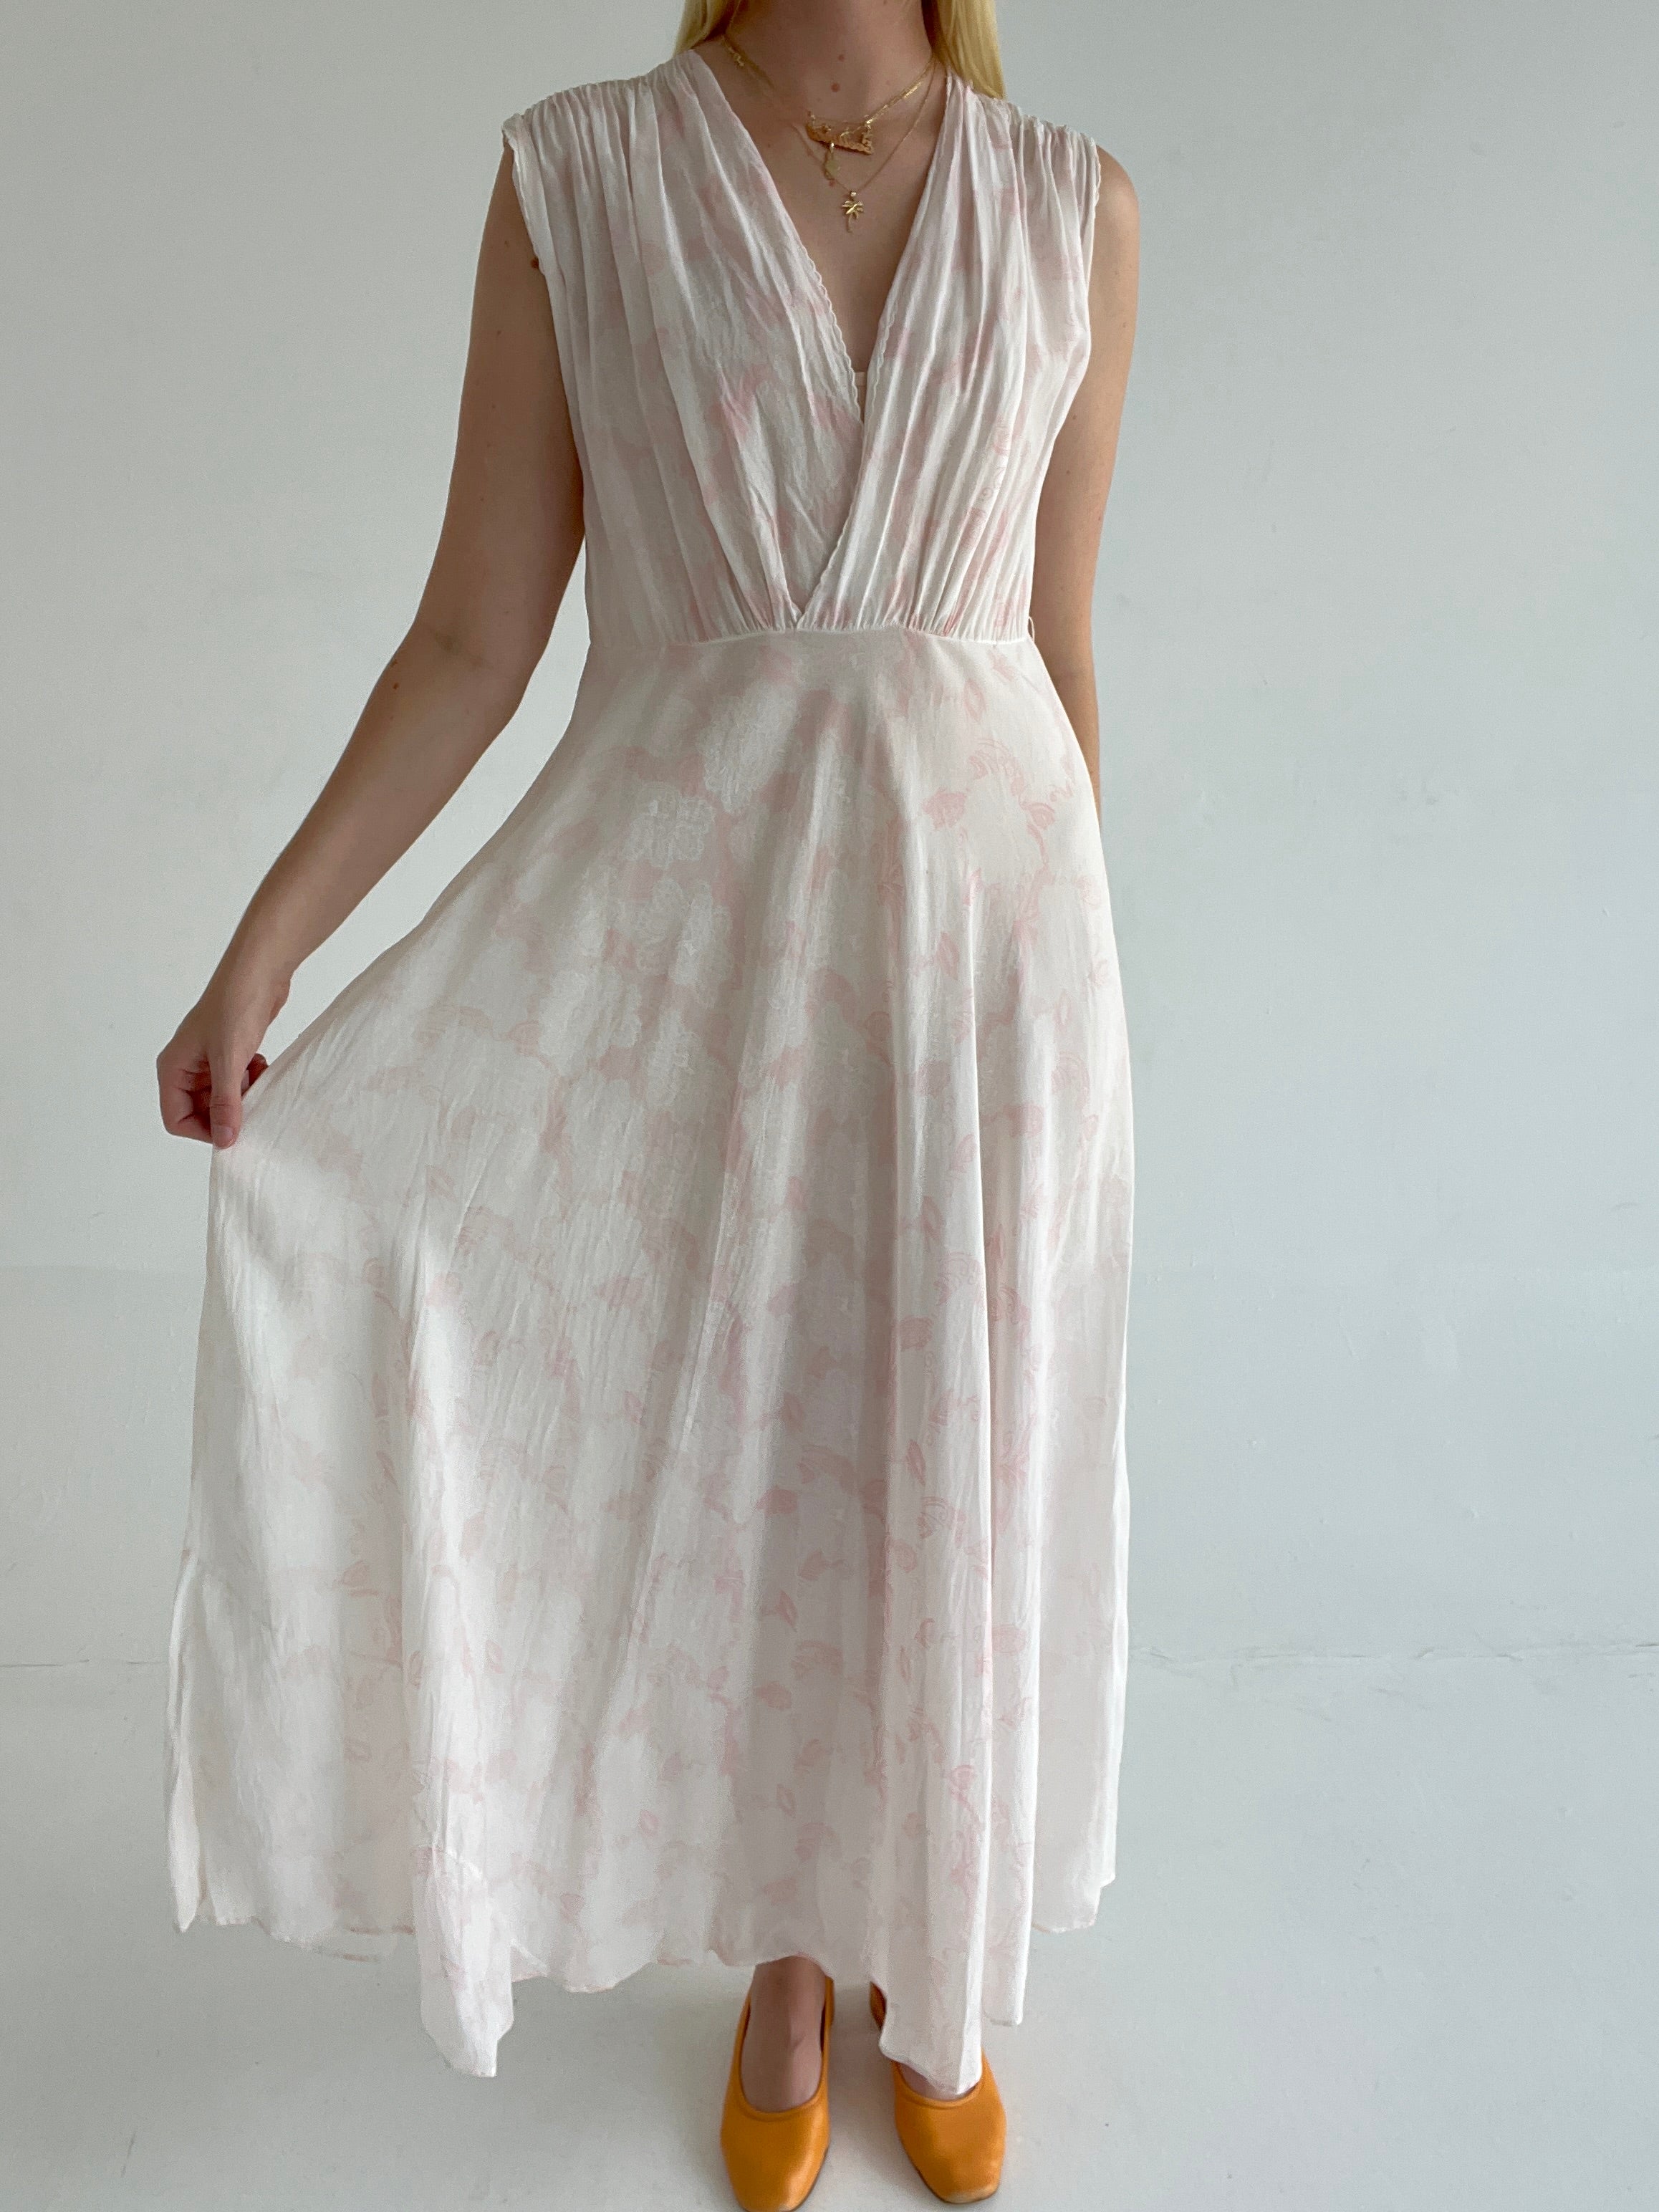 1940's White Slip with Pink Floral Print